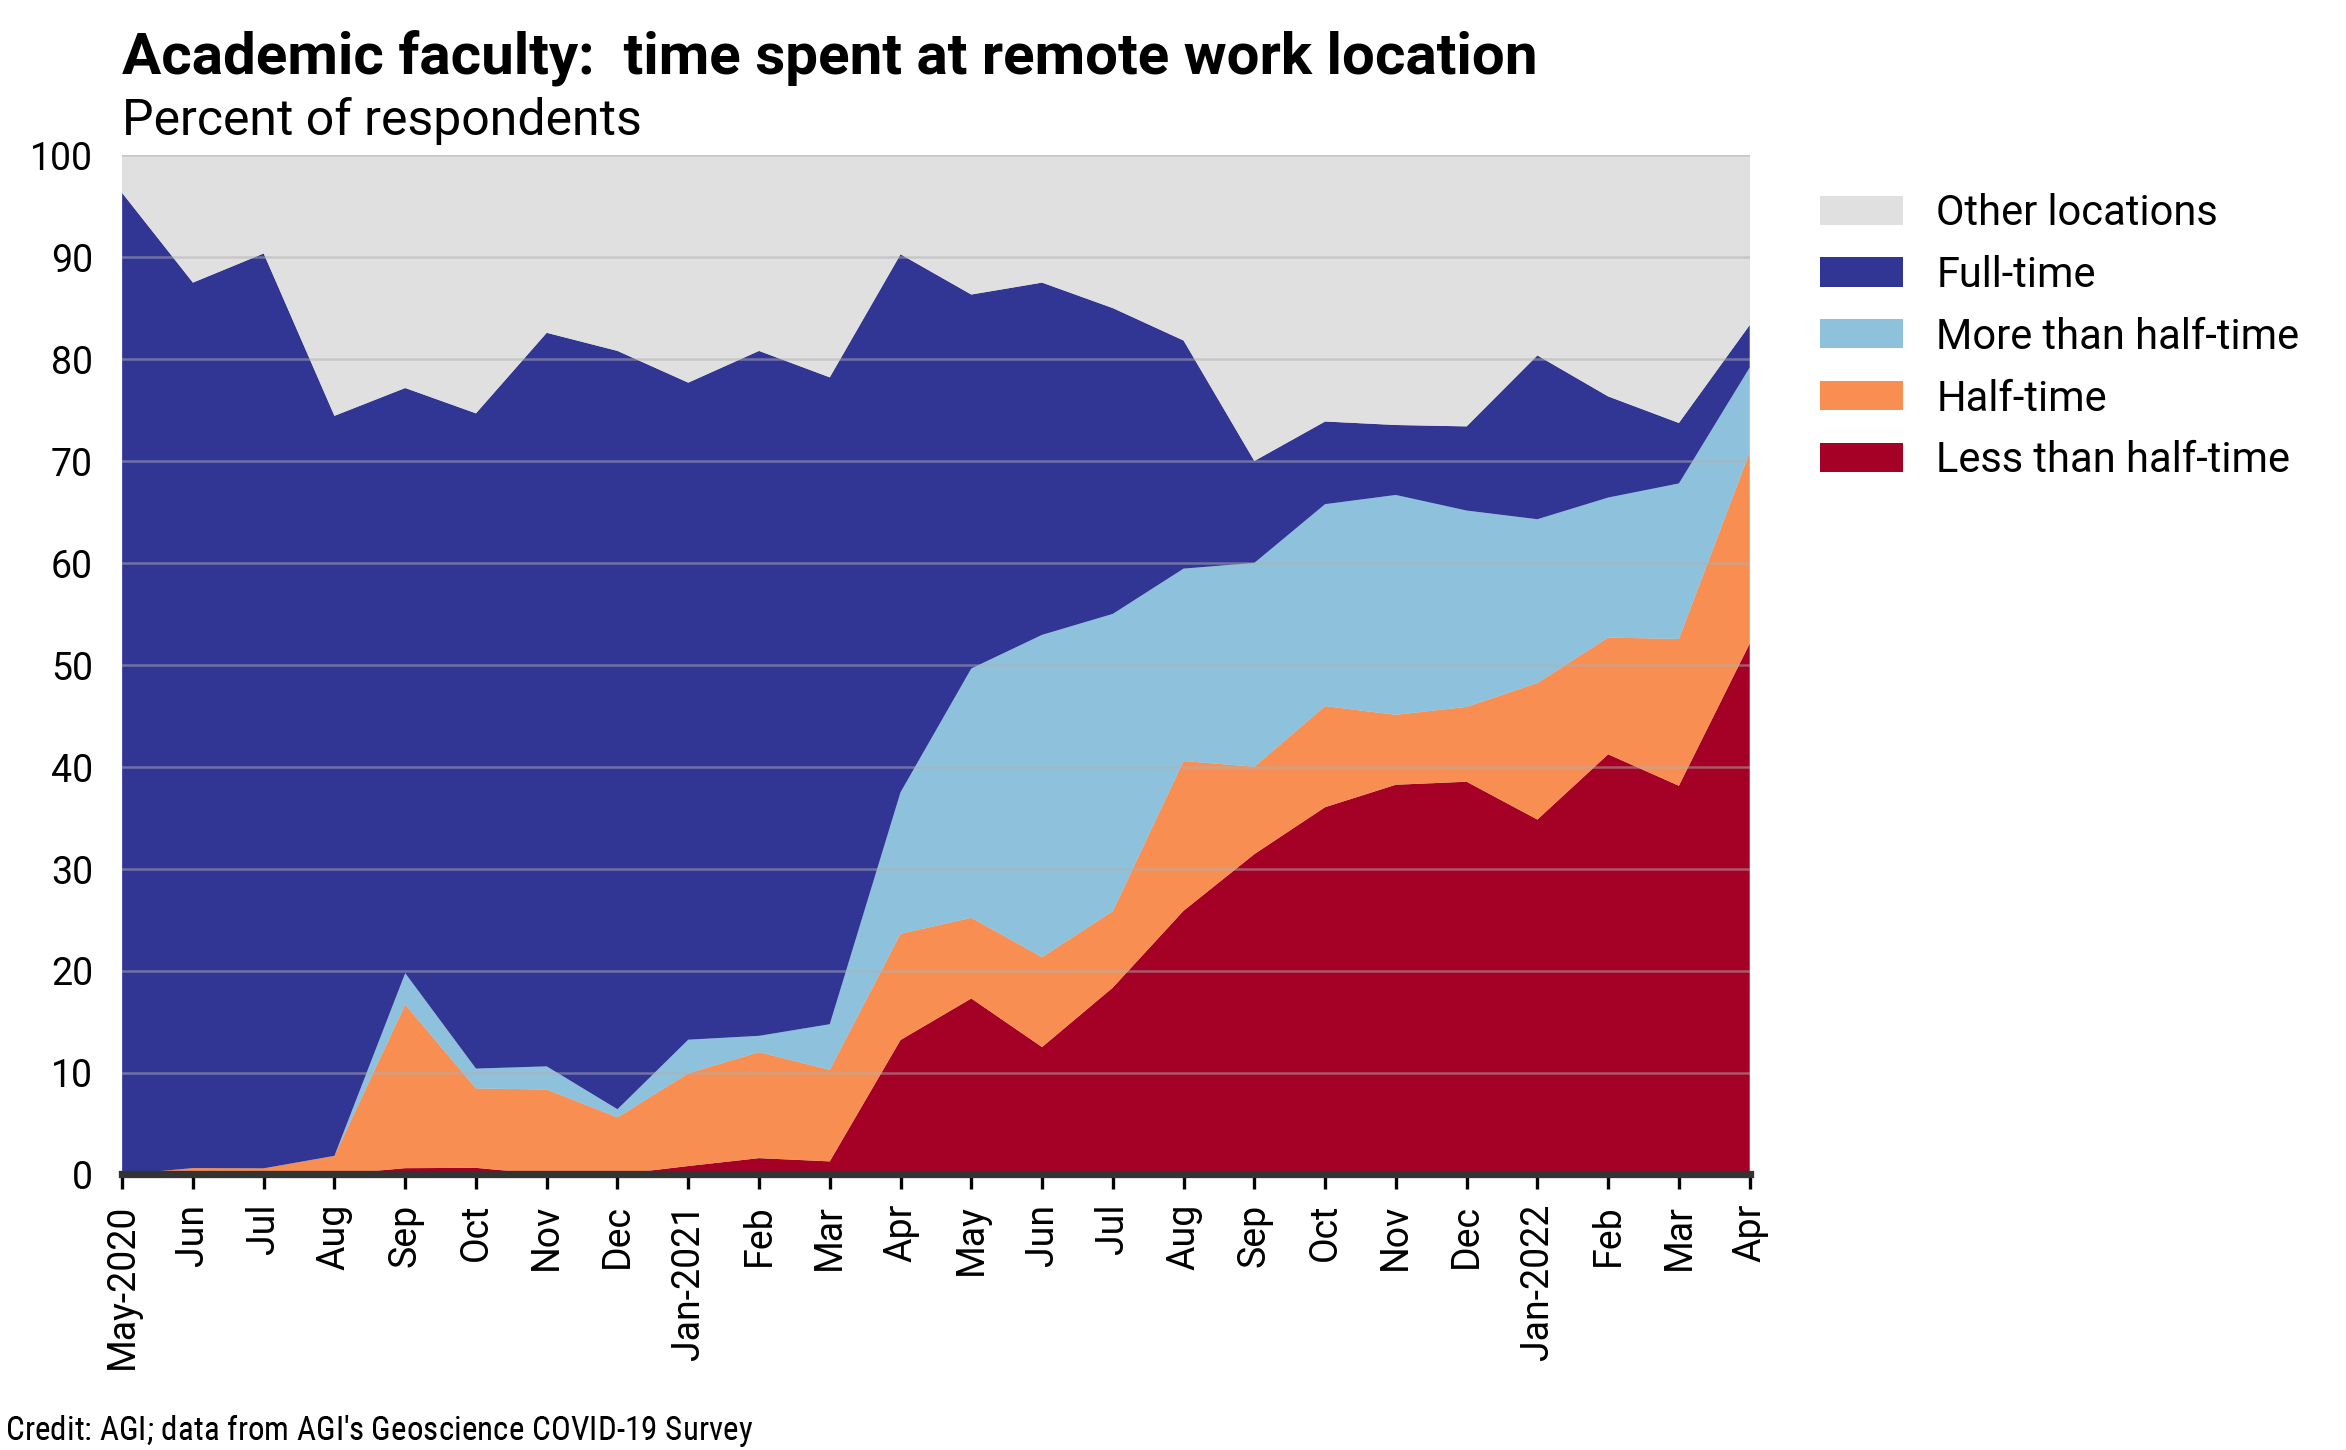 DB_2022-006 chart 04: Academic faculty: time spent at remote work location (Credit: AGI; data from AGI's Geoscience COVID-19 Survey)